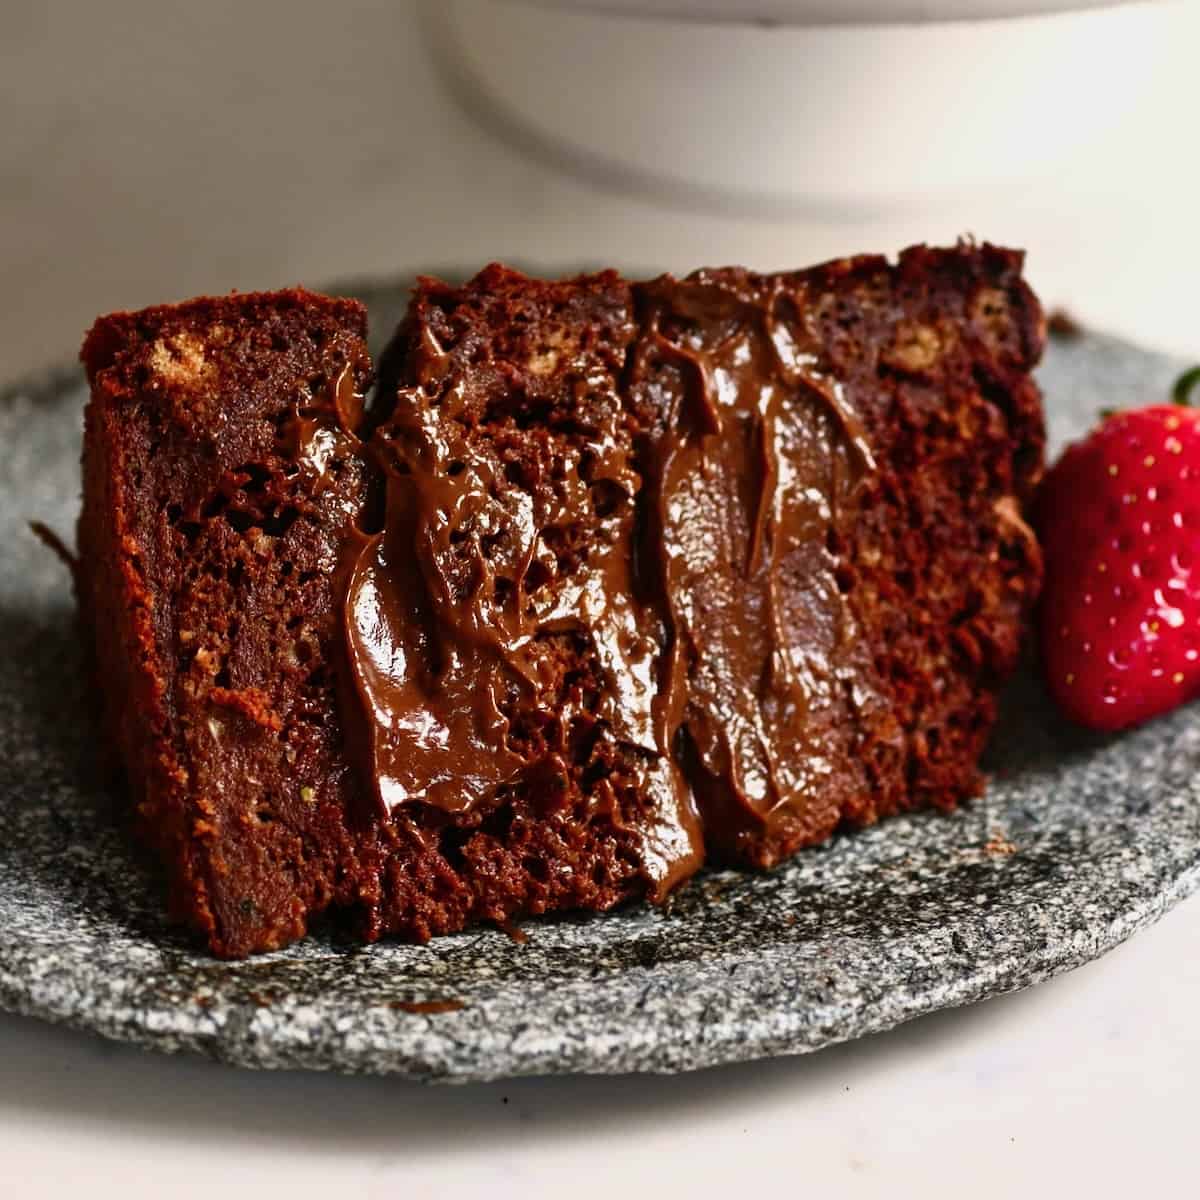 A slice of chocolate zucchini cake topped with a strawberry